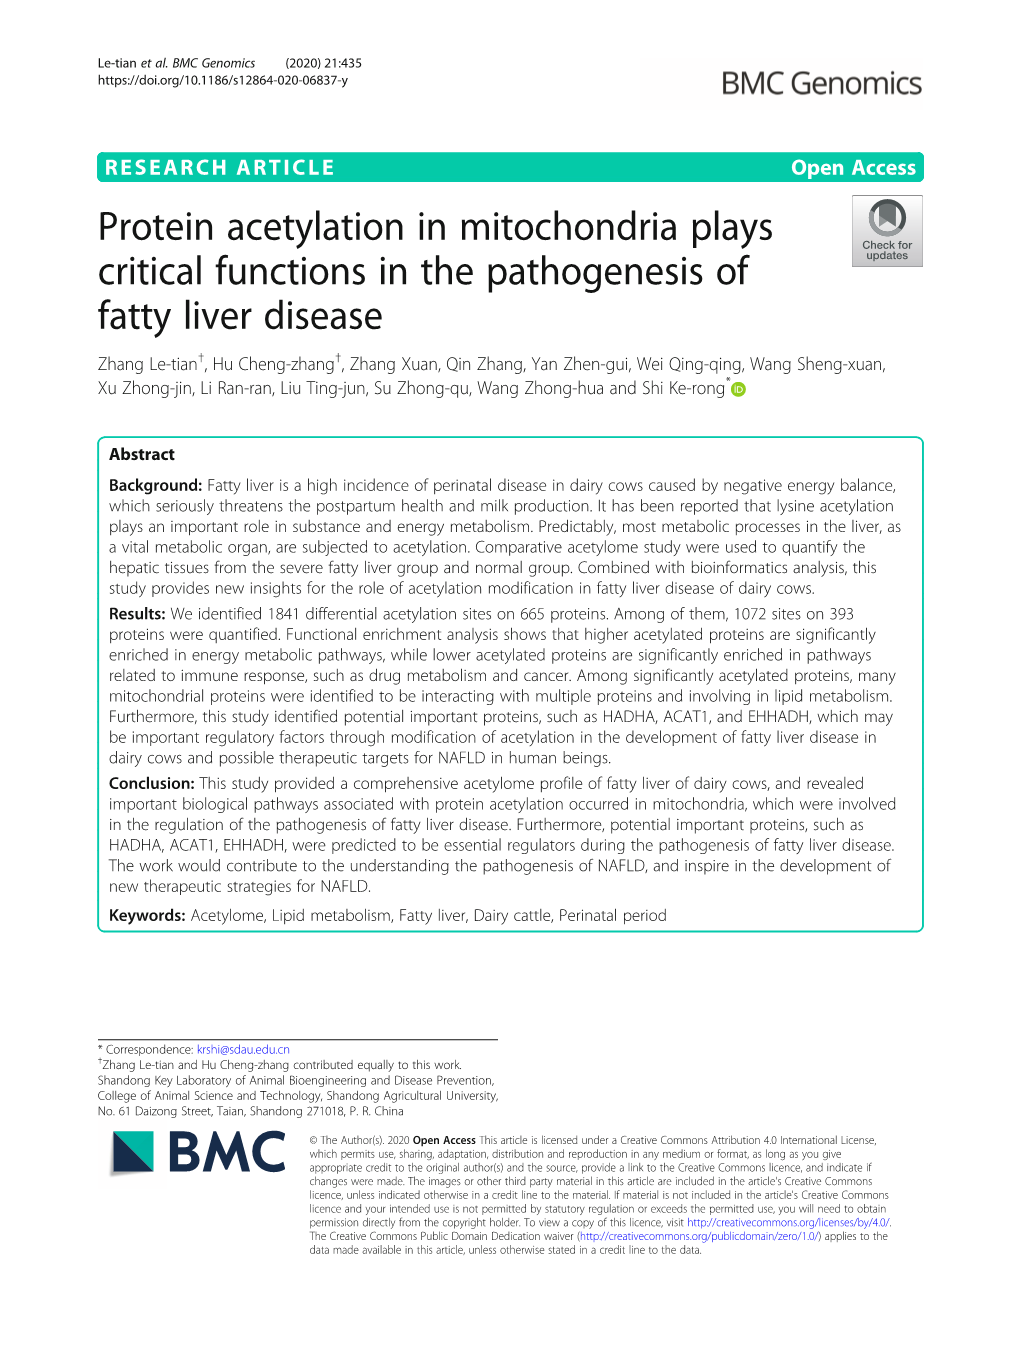 Protein Acetylation in Mitochondria Plays Critical Functions in The